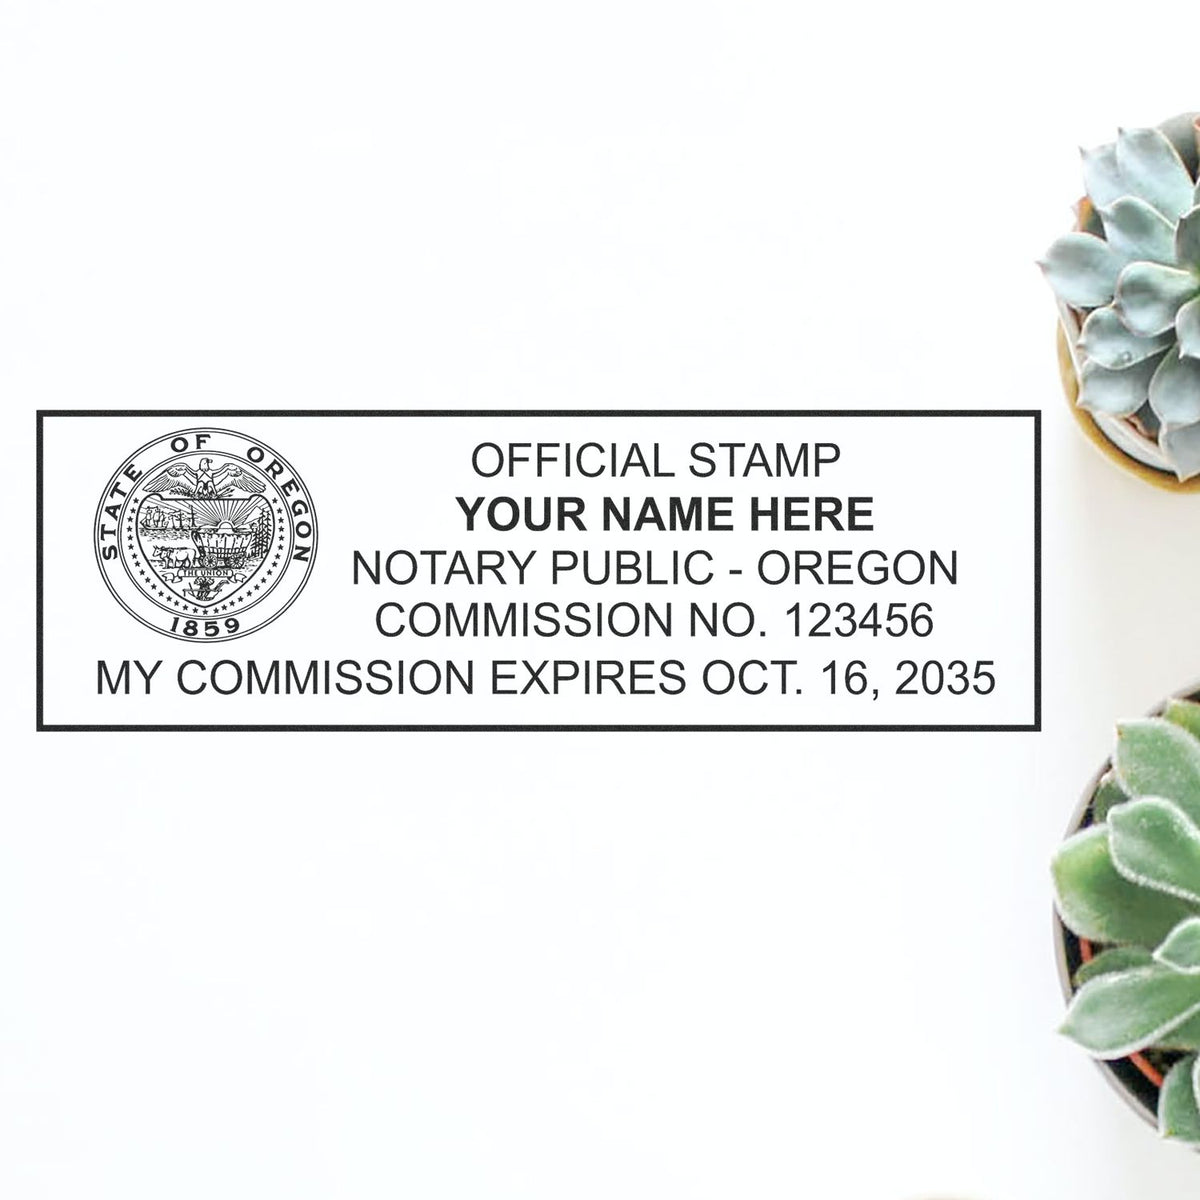 An alternative view of the Slim Pre-Inked Rectangular Notary Stamp for Oregon stamped on a sheet of paper showing the image in use